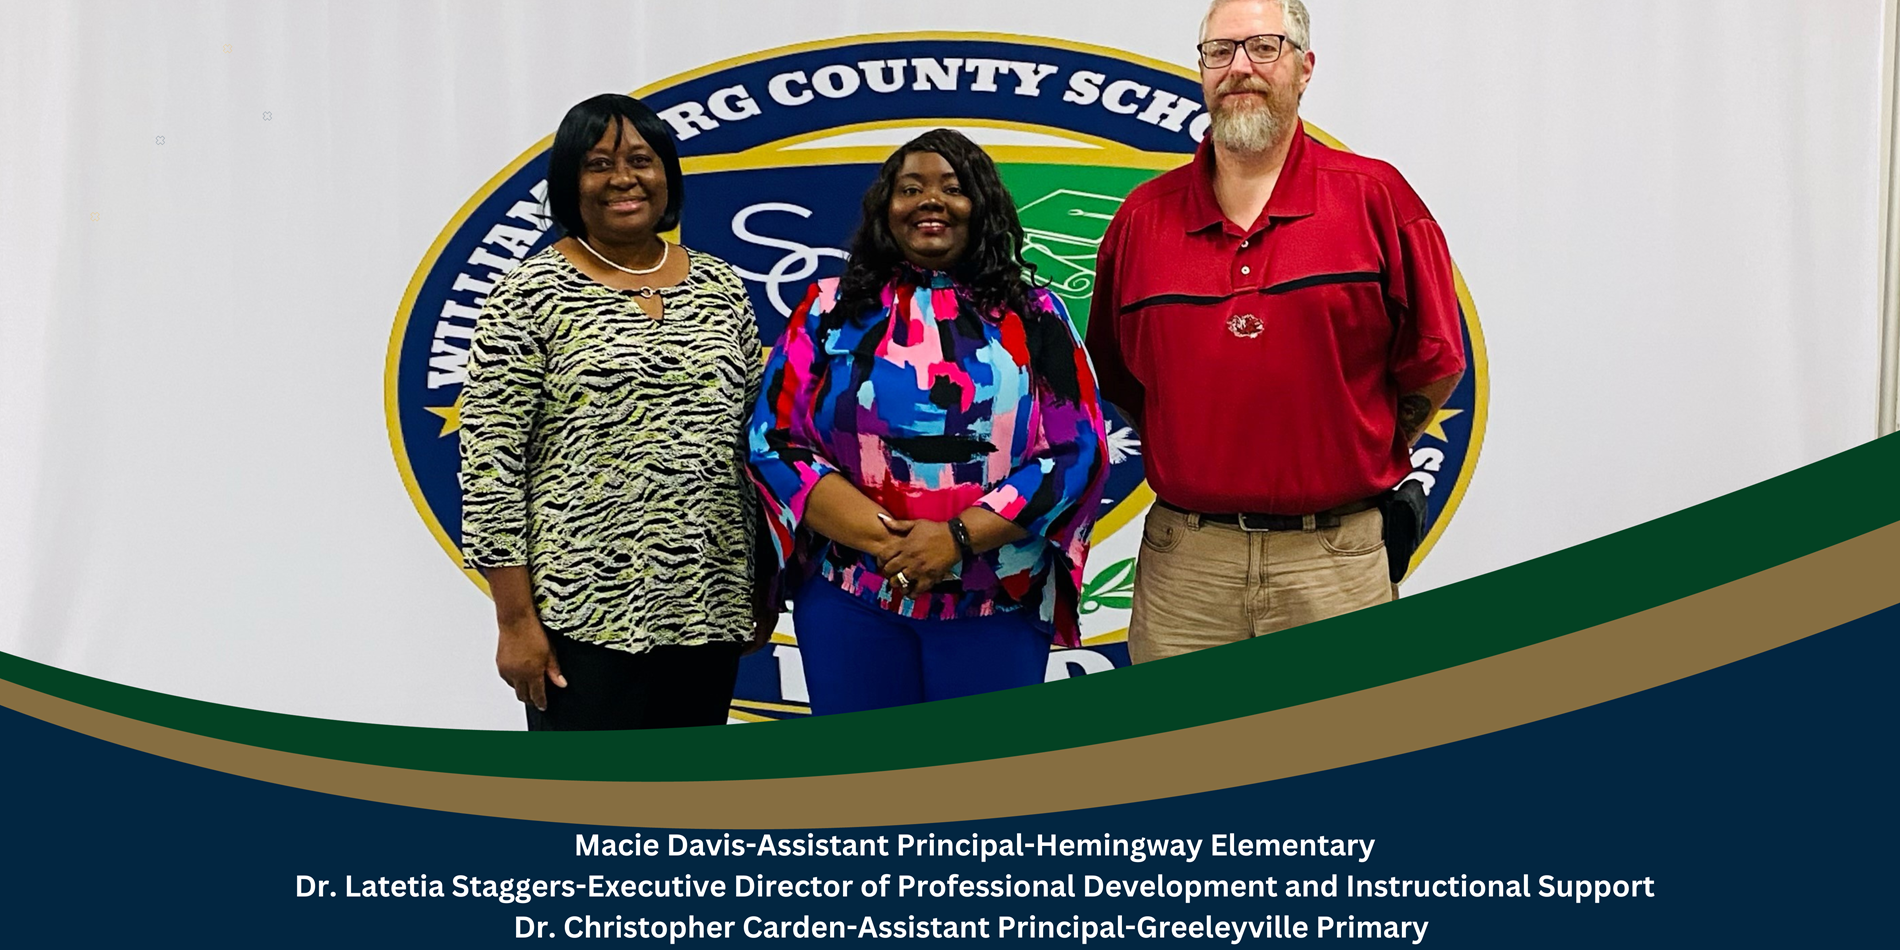 Macie Davis-Assistant principal-Hemingway Elementary. Dr. Latetia Staggers-Executive Director of Professional Development and Instructional Support, Dr. Christopher Carden-Assistant Principal-Greeleyville Primary